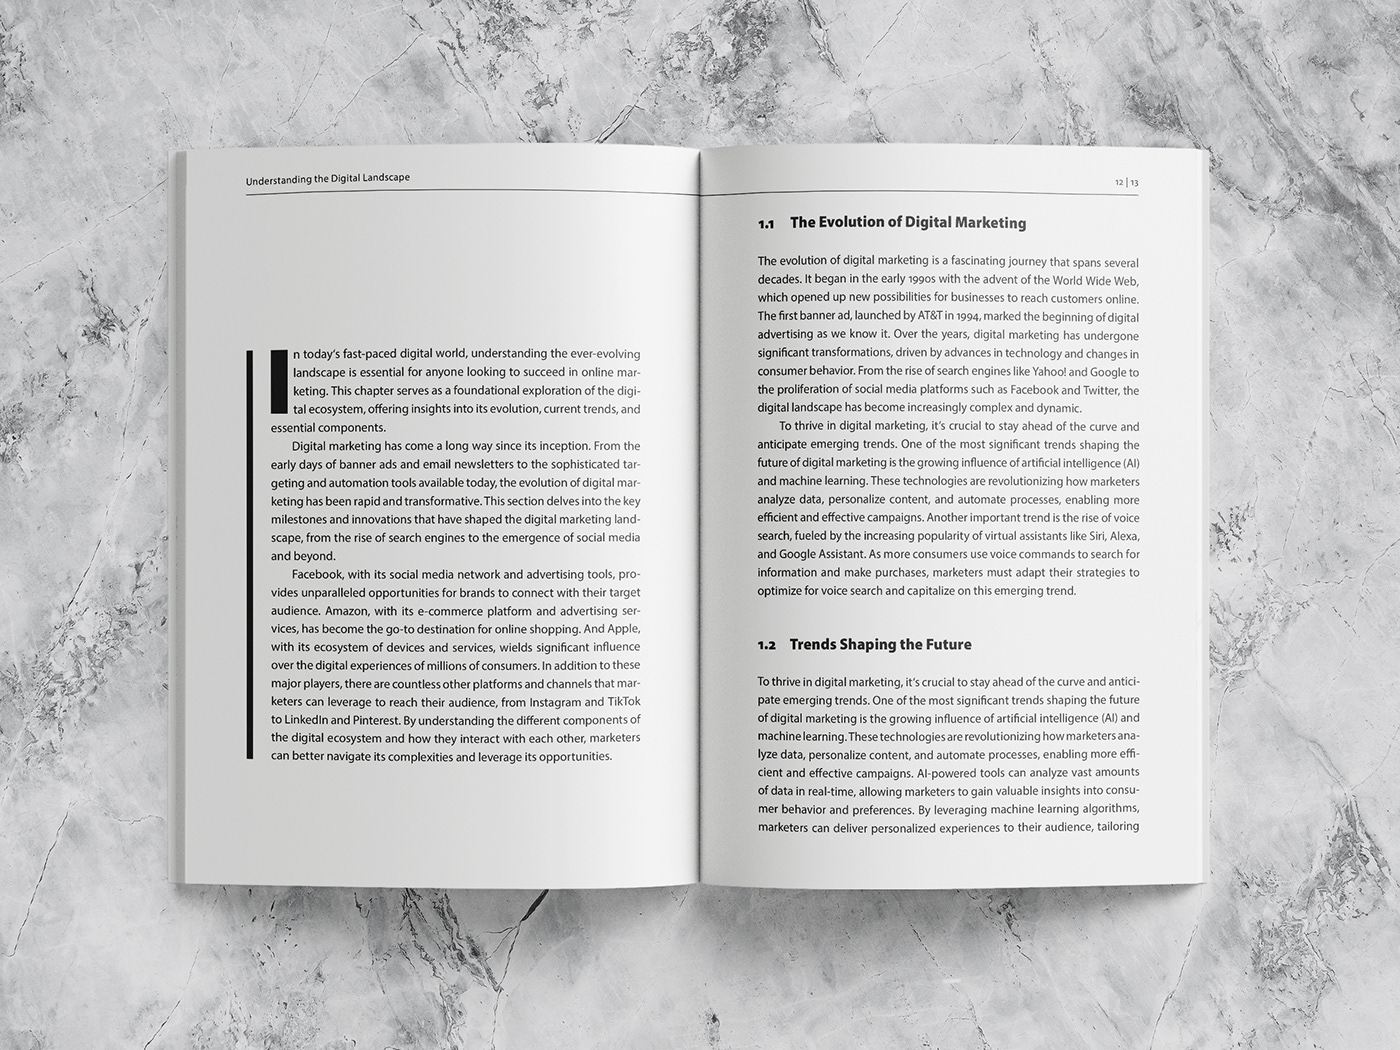 Book mockup – spread: showing the teaser, two subheadings and copy text